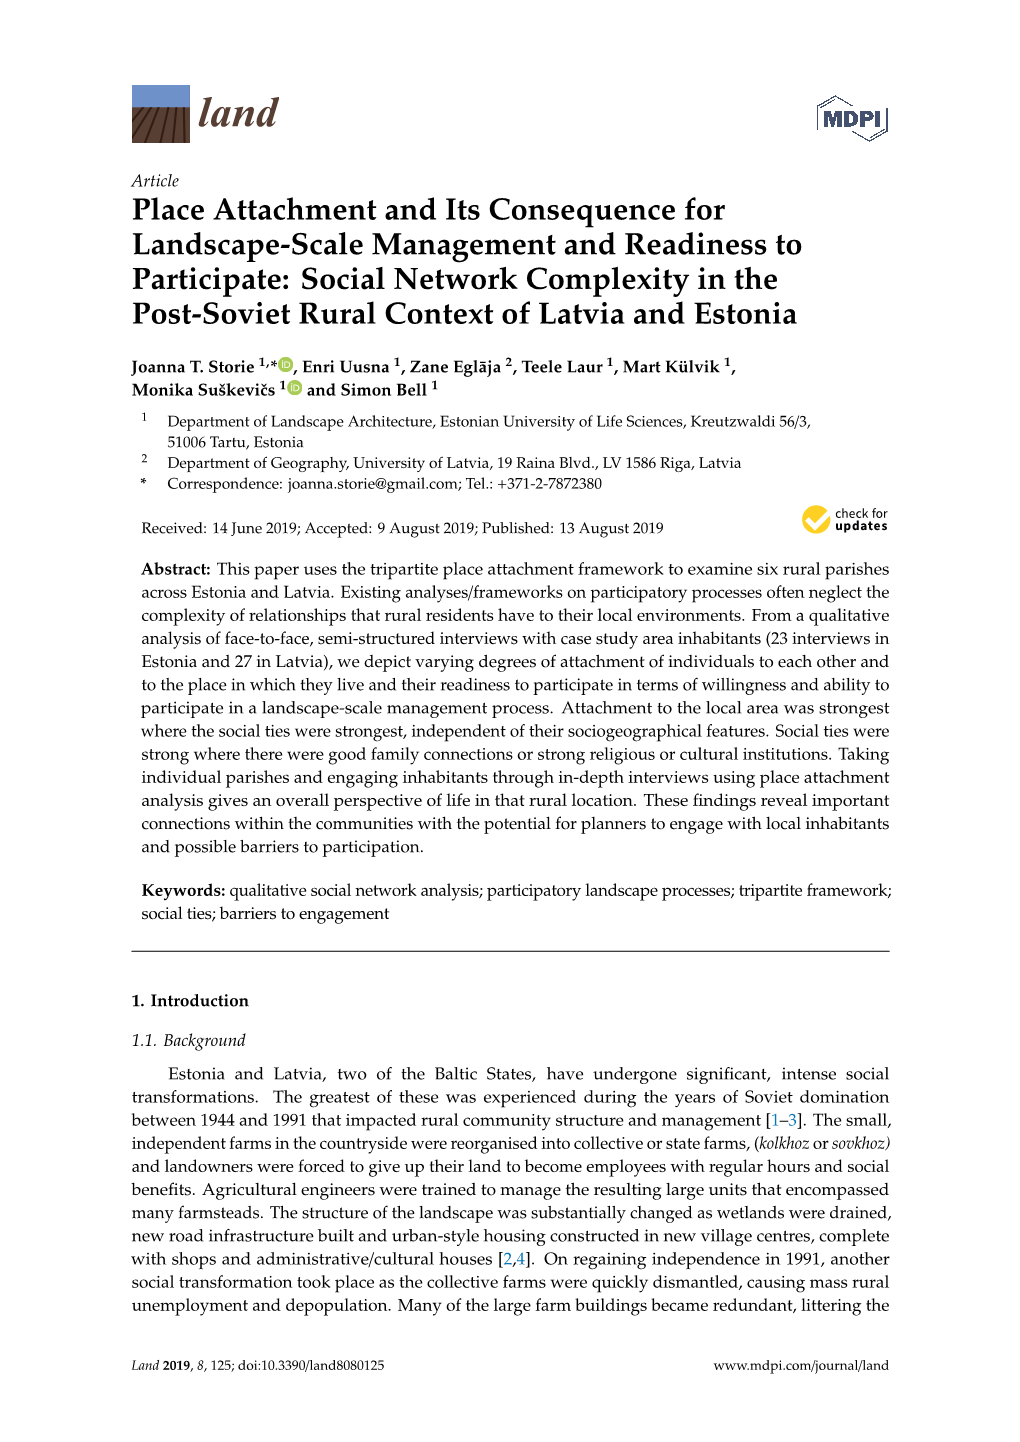 Place Attachment and Its Consequence for Landscape-Scale Management and Readiness to Participate